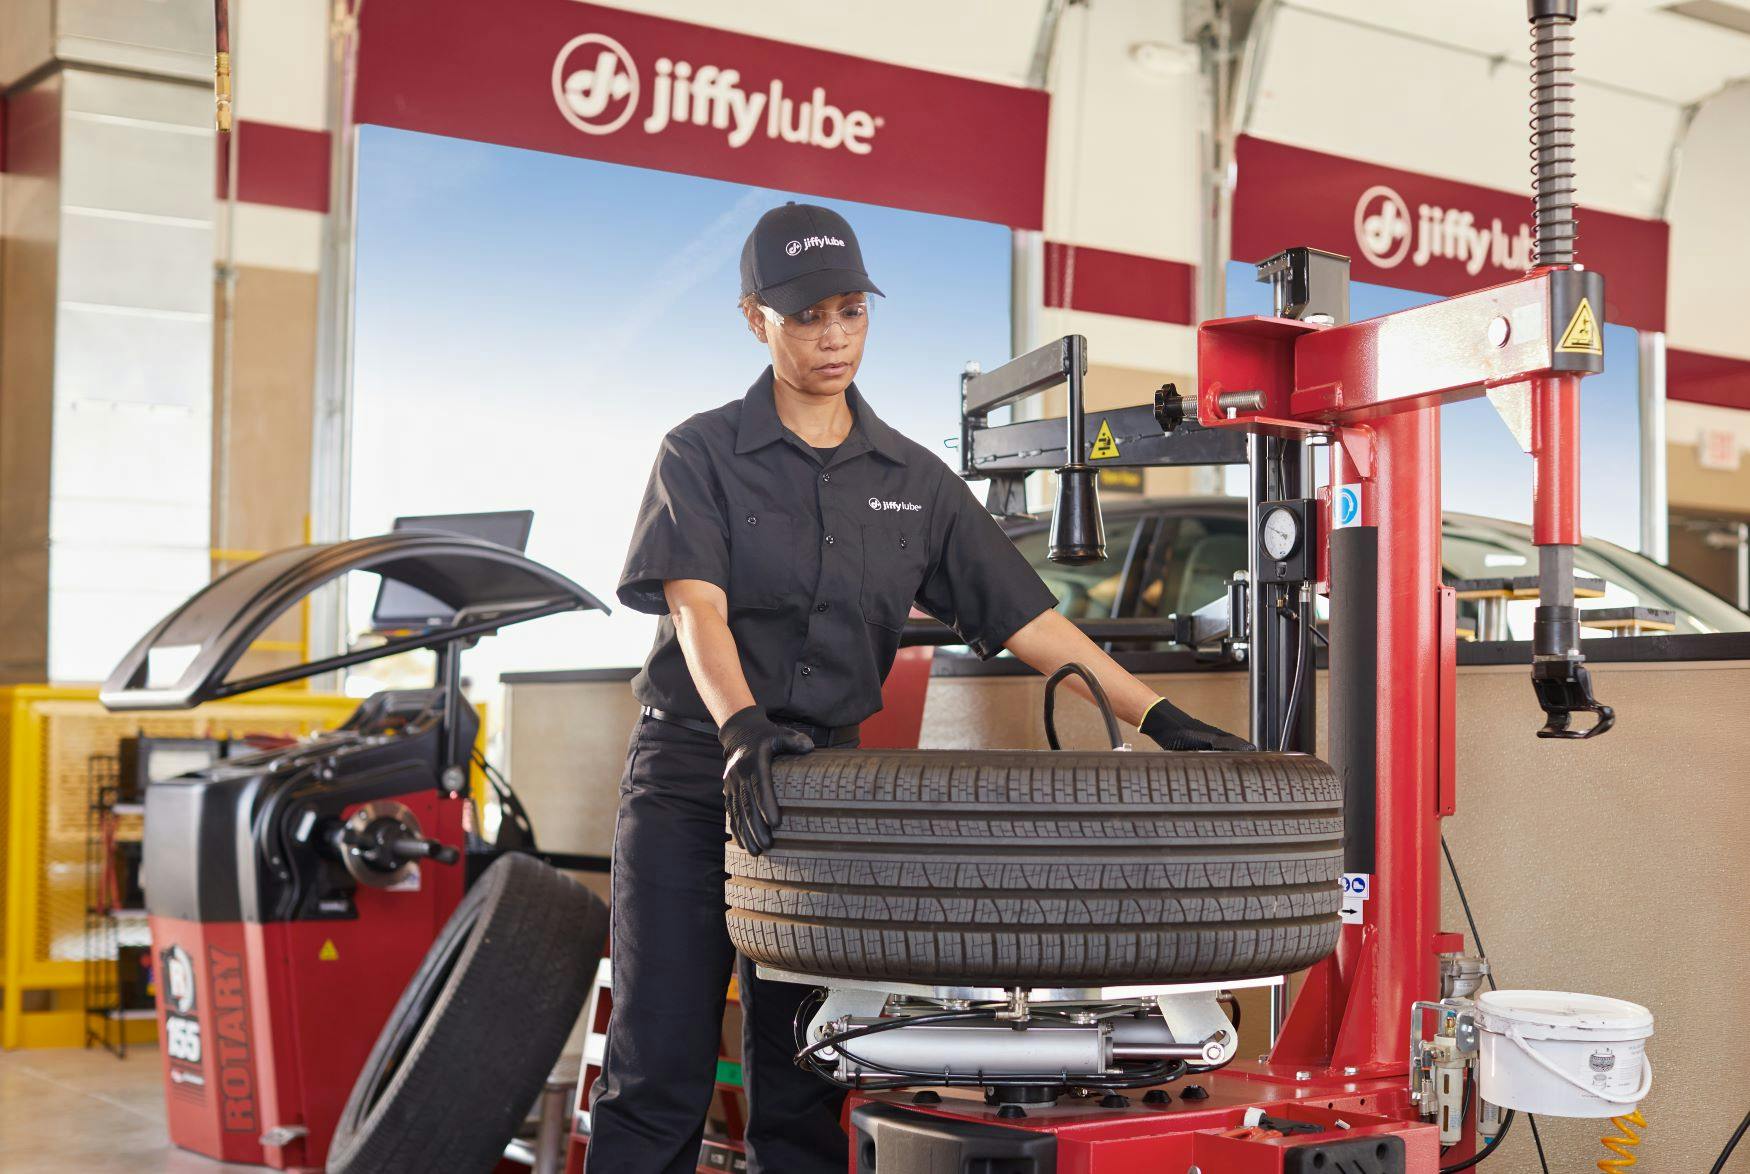 A Jiffy Lube technician performing a tire replacement